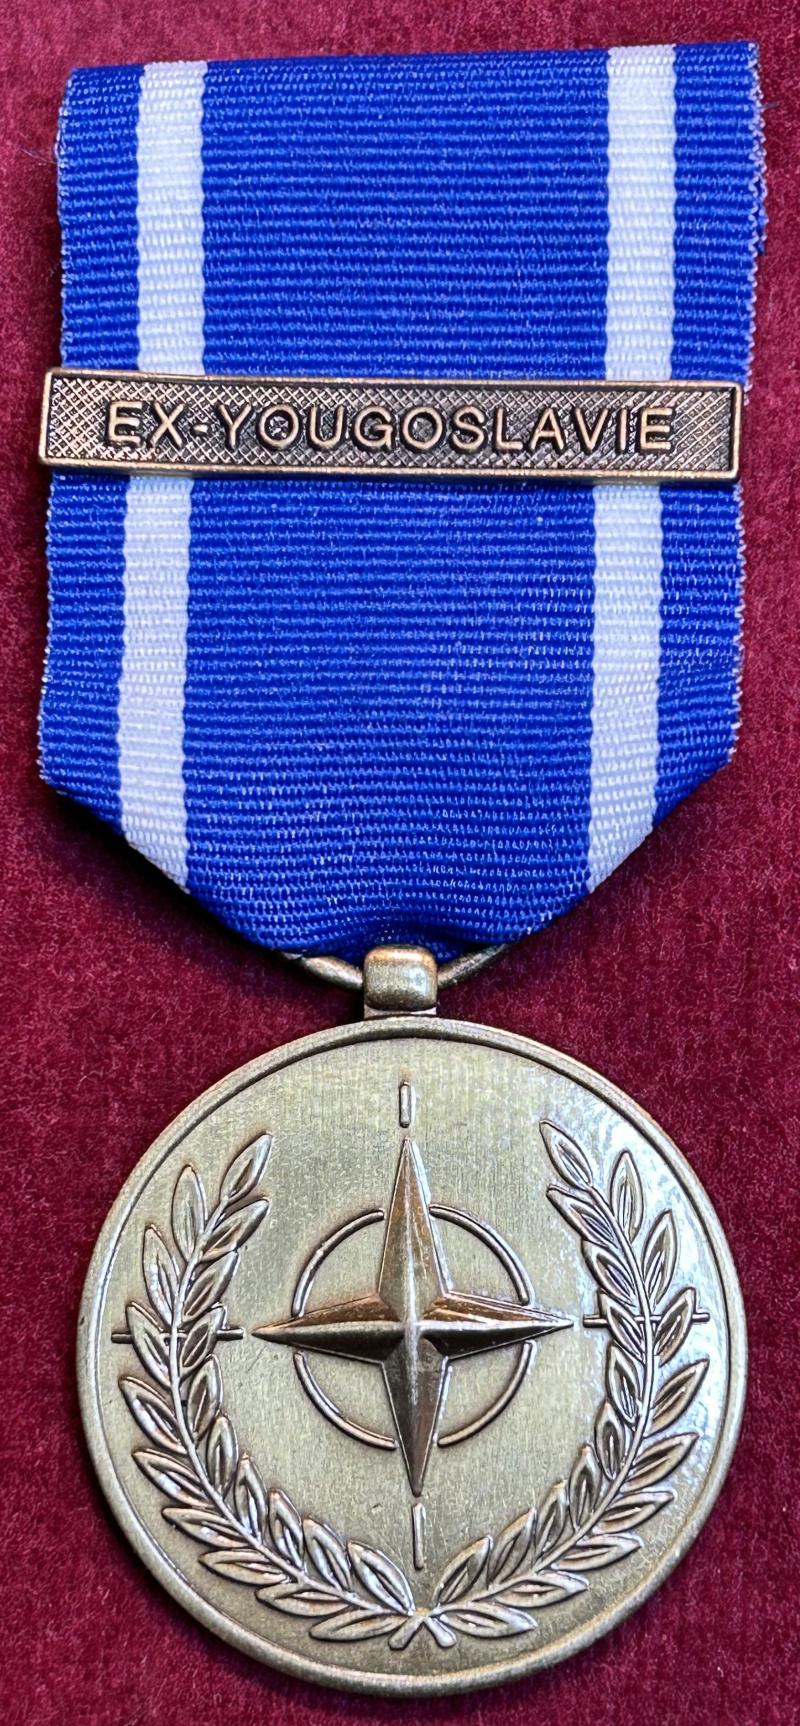 NATO Non-Article 5 medal for ISAF (version Ex-Yougoslavie)